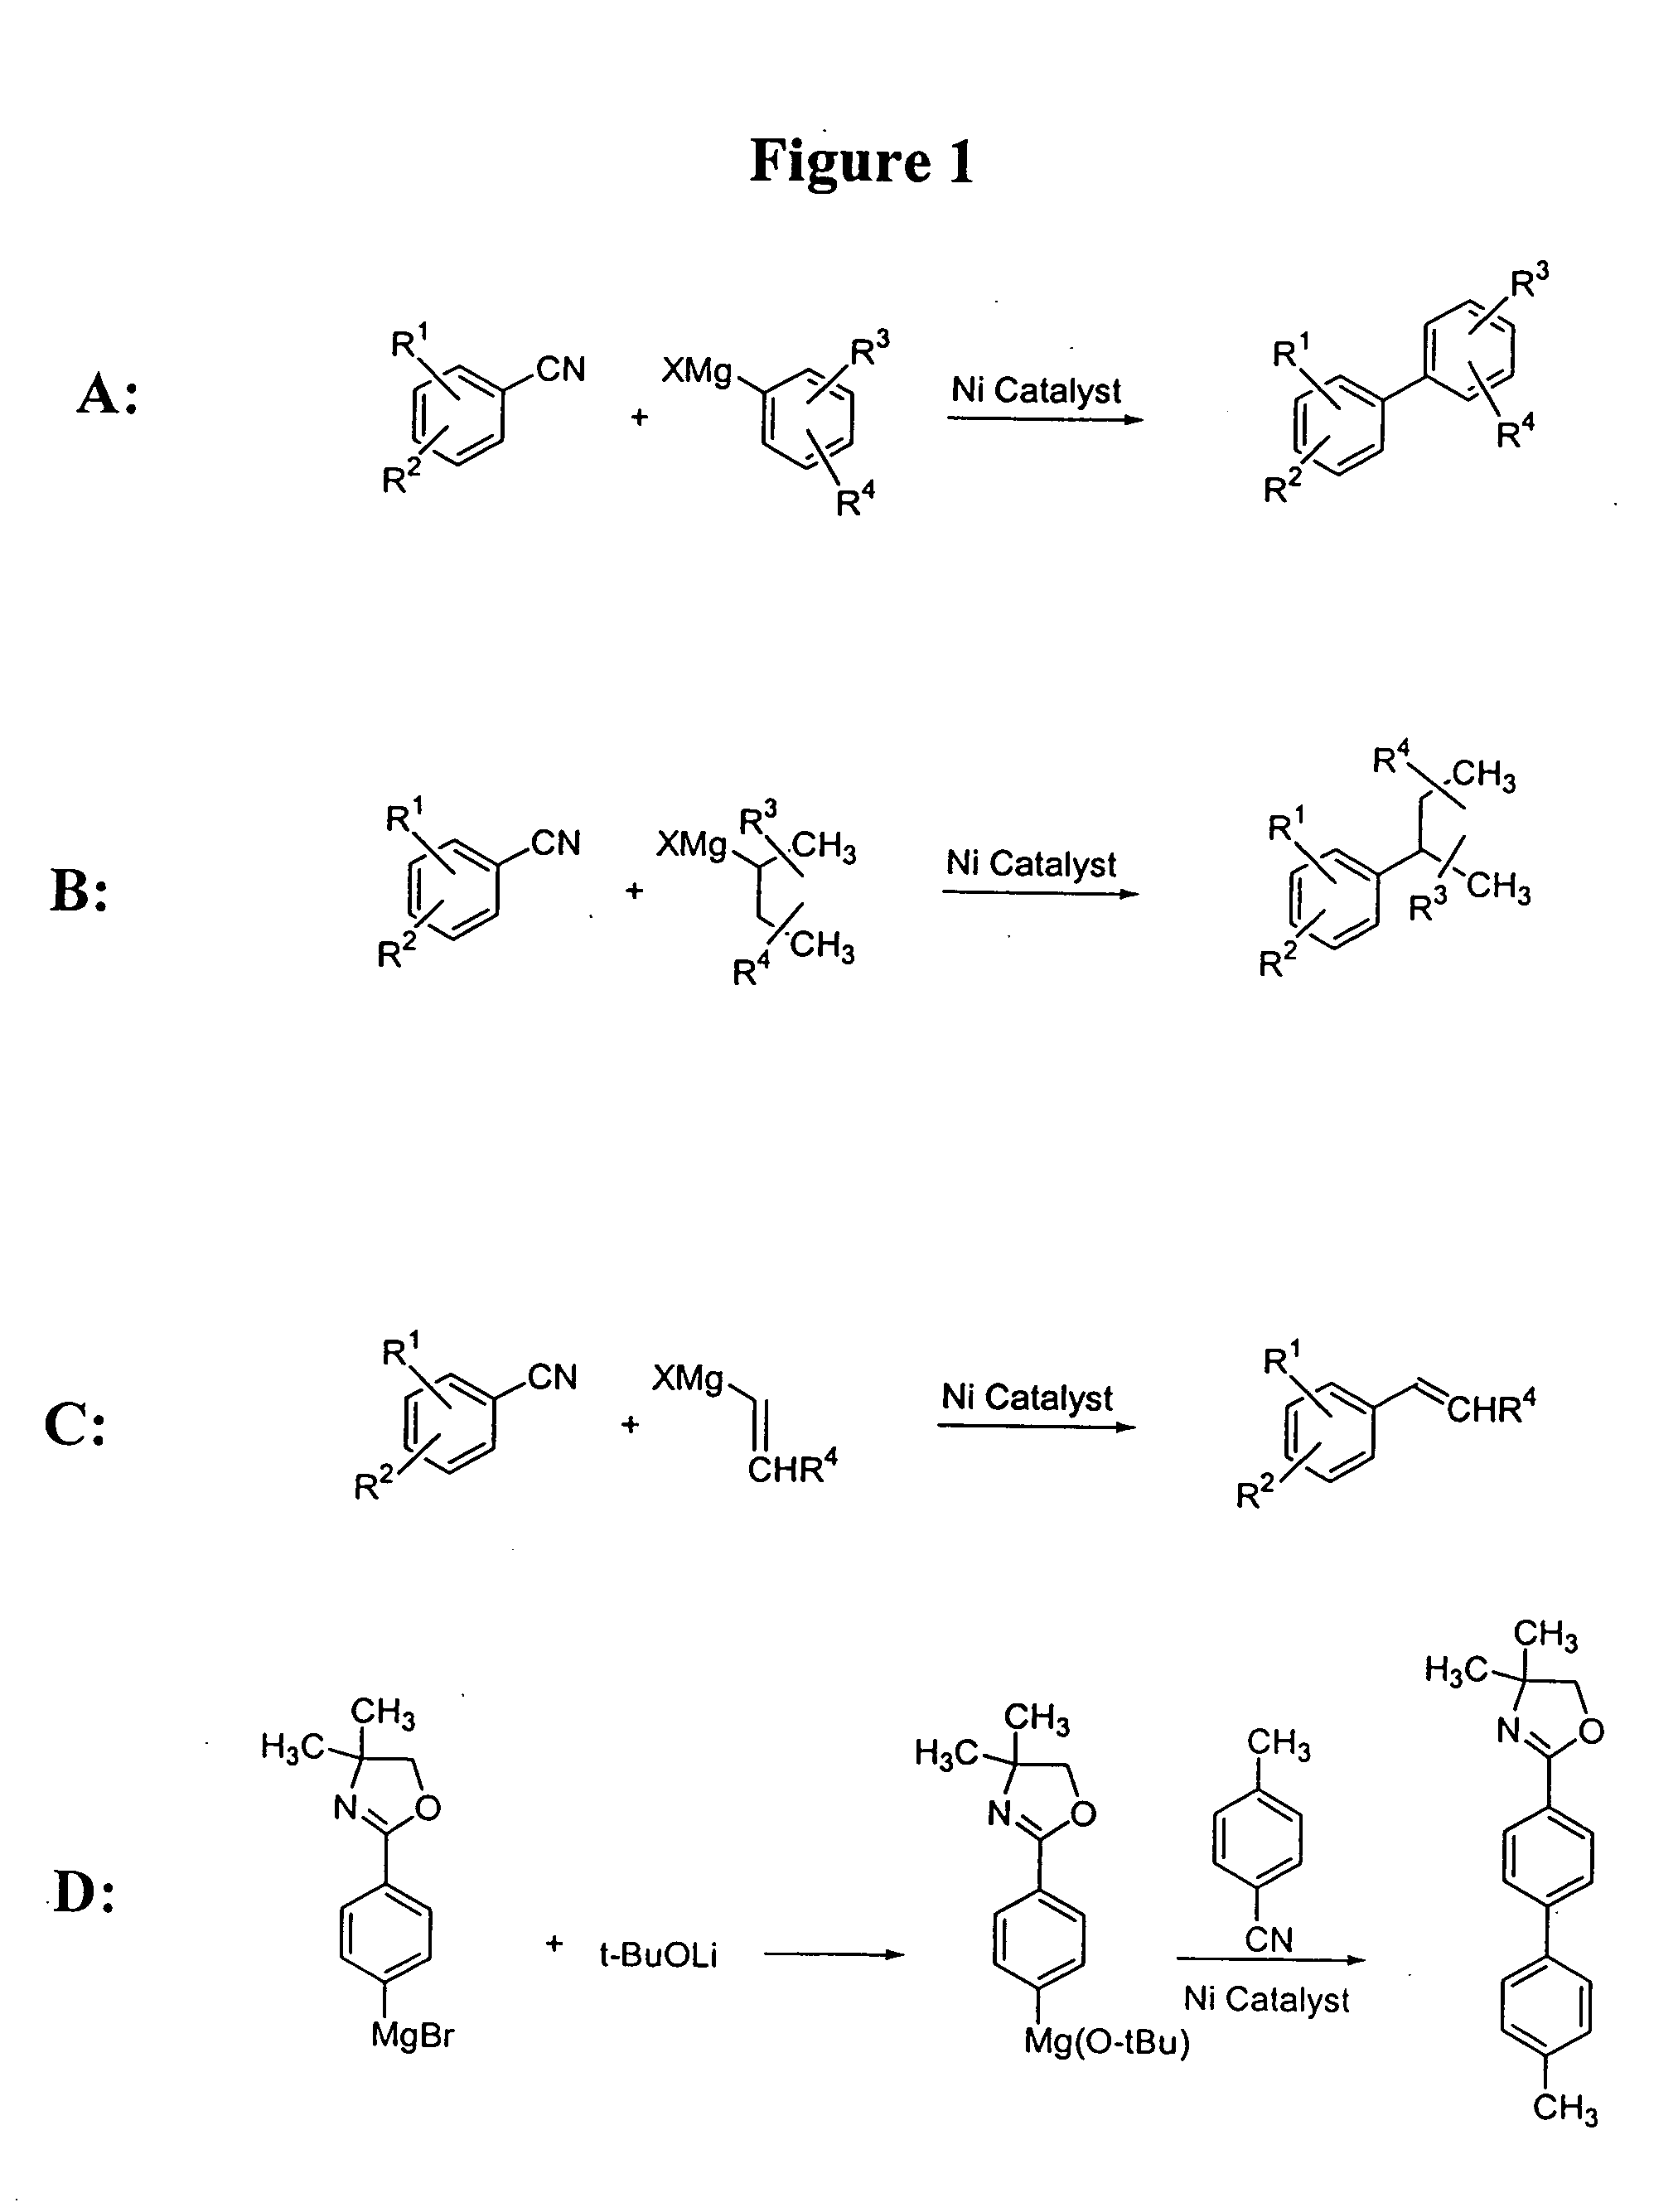 Process for preparing unsymmetrical biaryls and alkylated aromatic compounds from arylnitriles